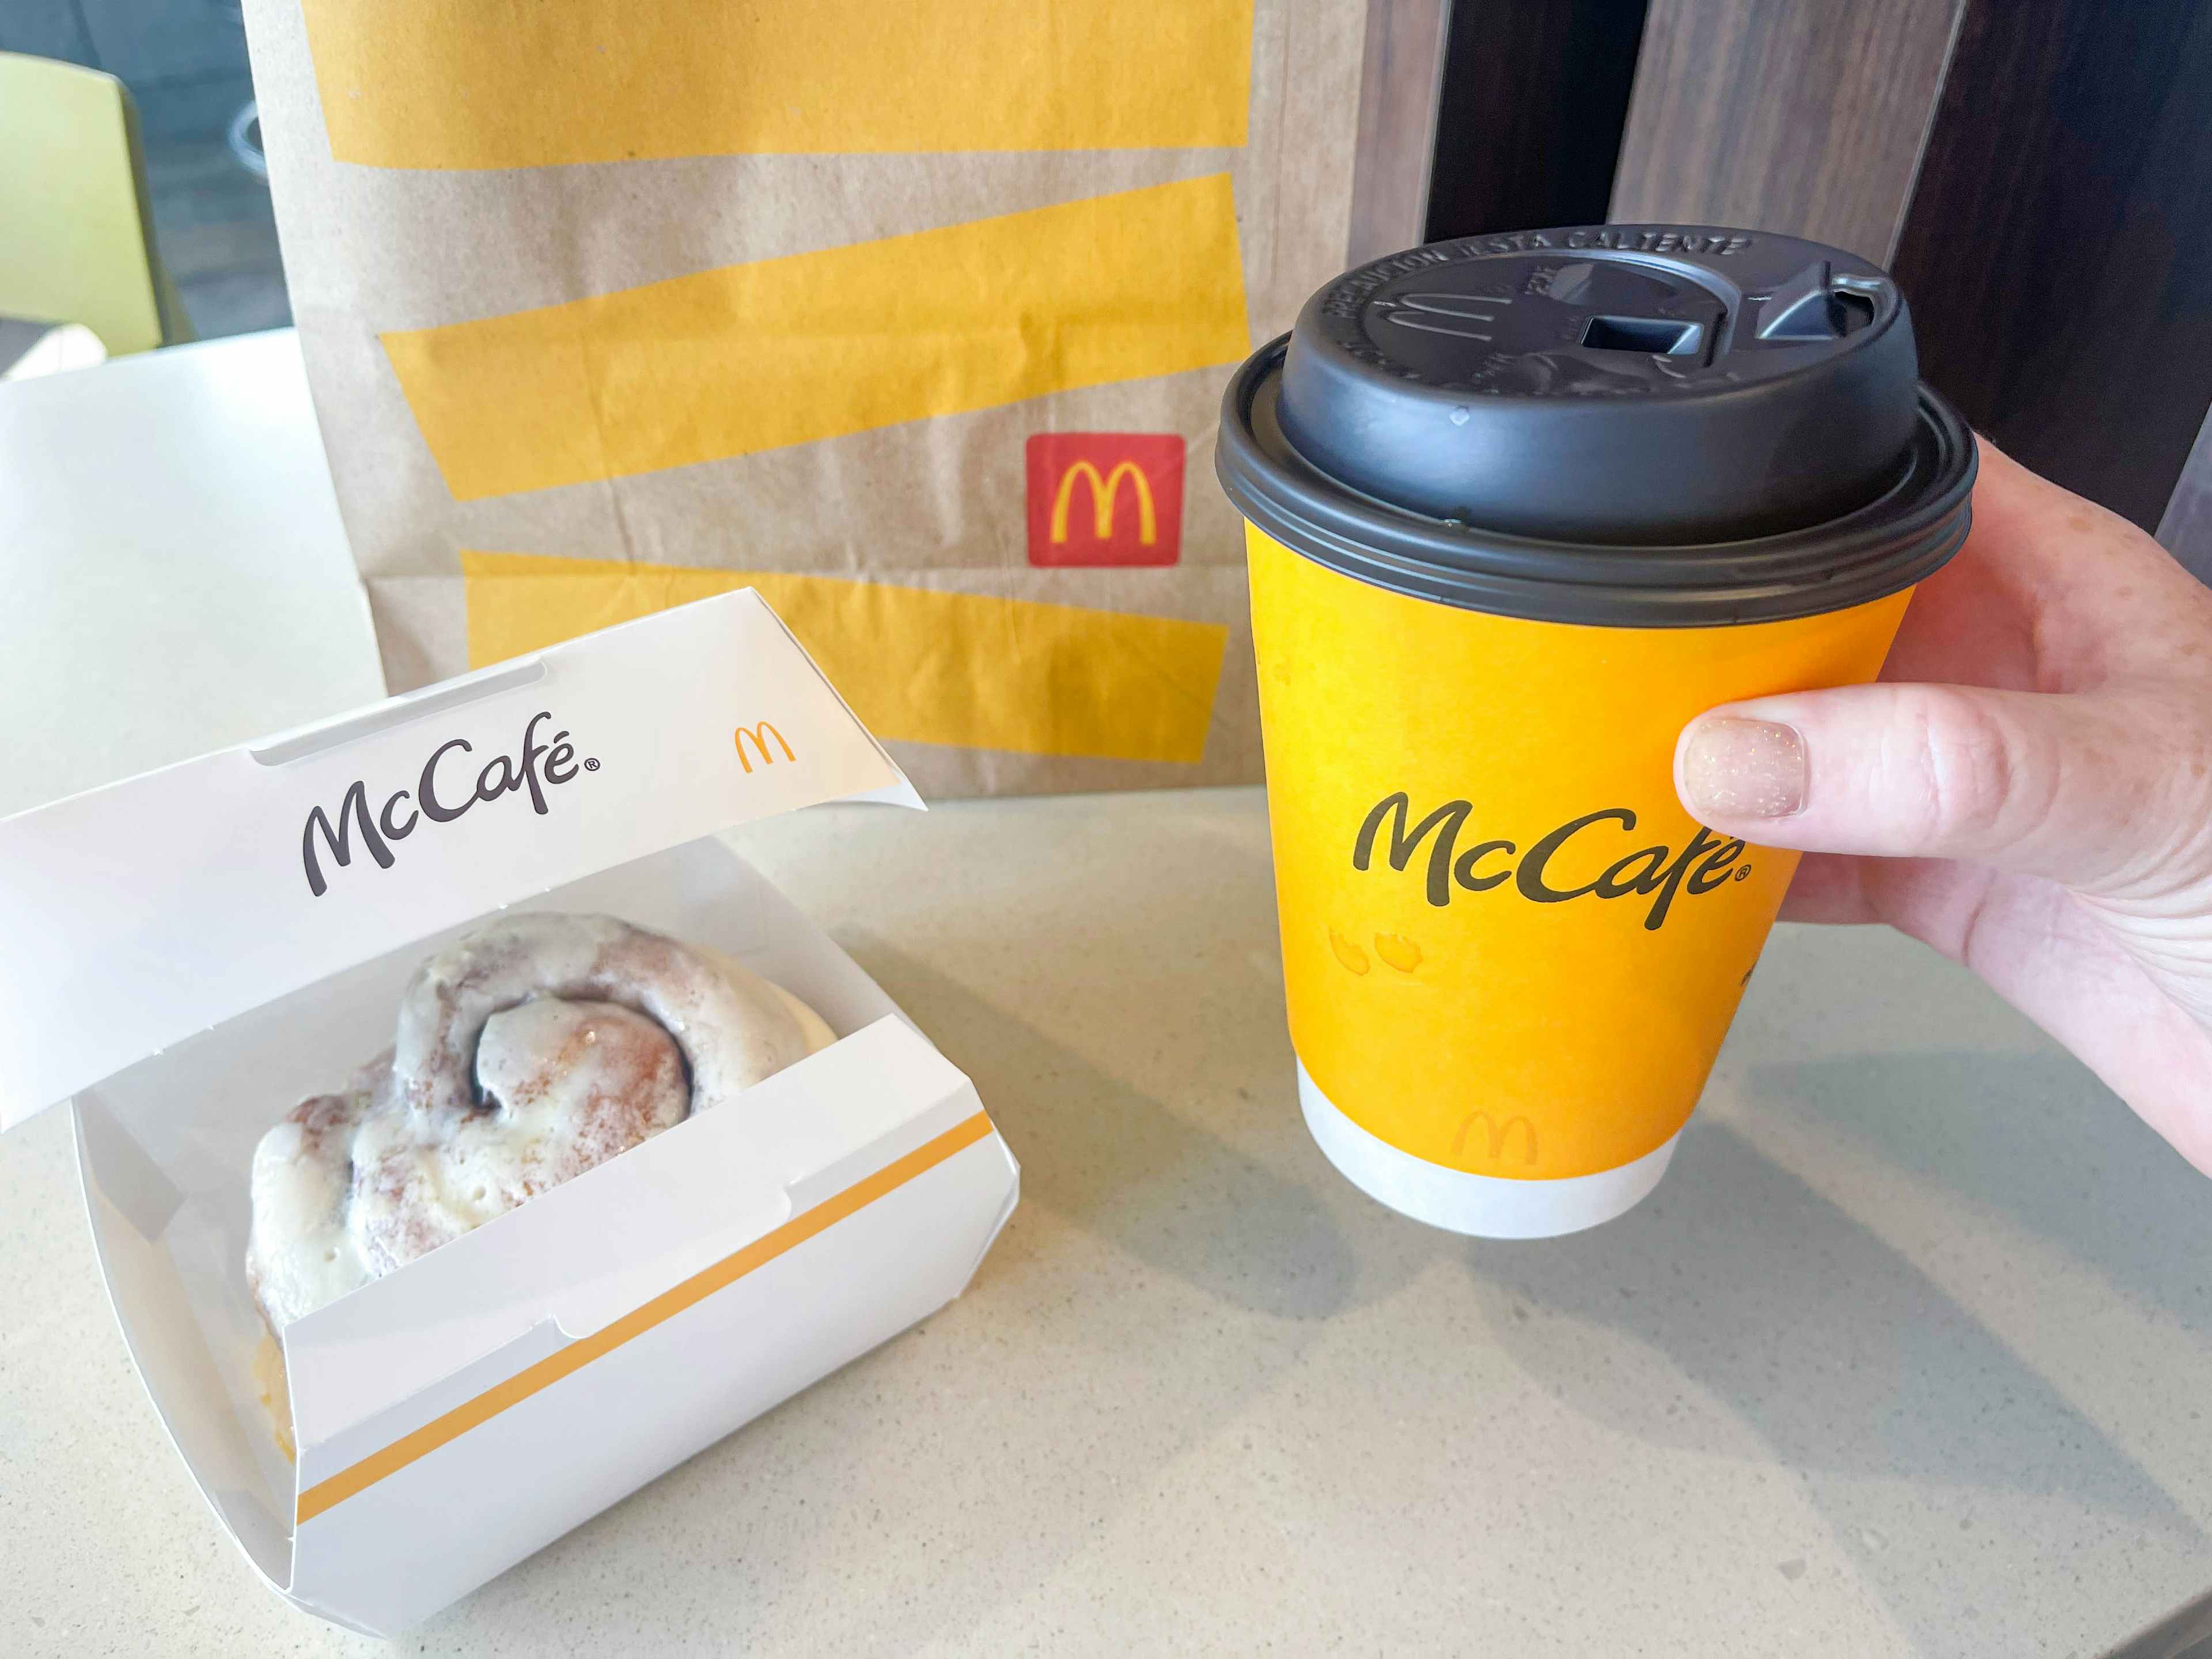 mccafe items on table at McDonalds